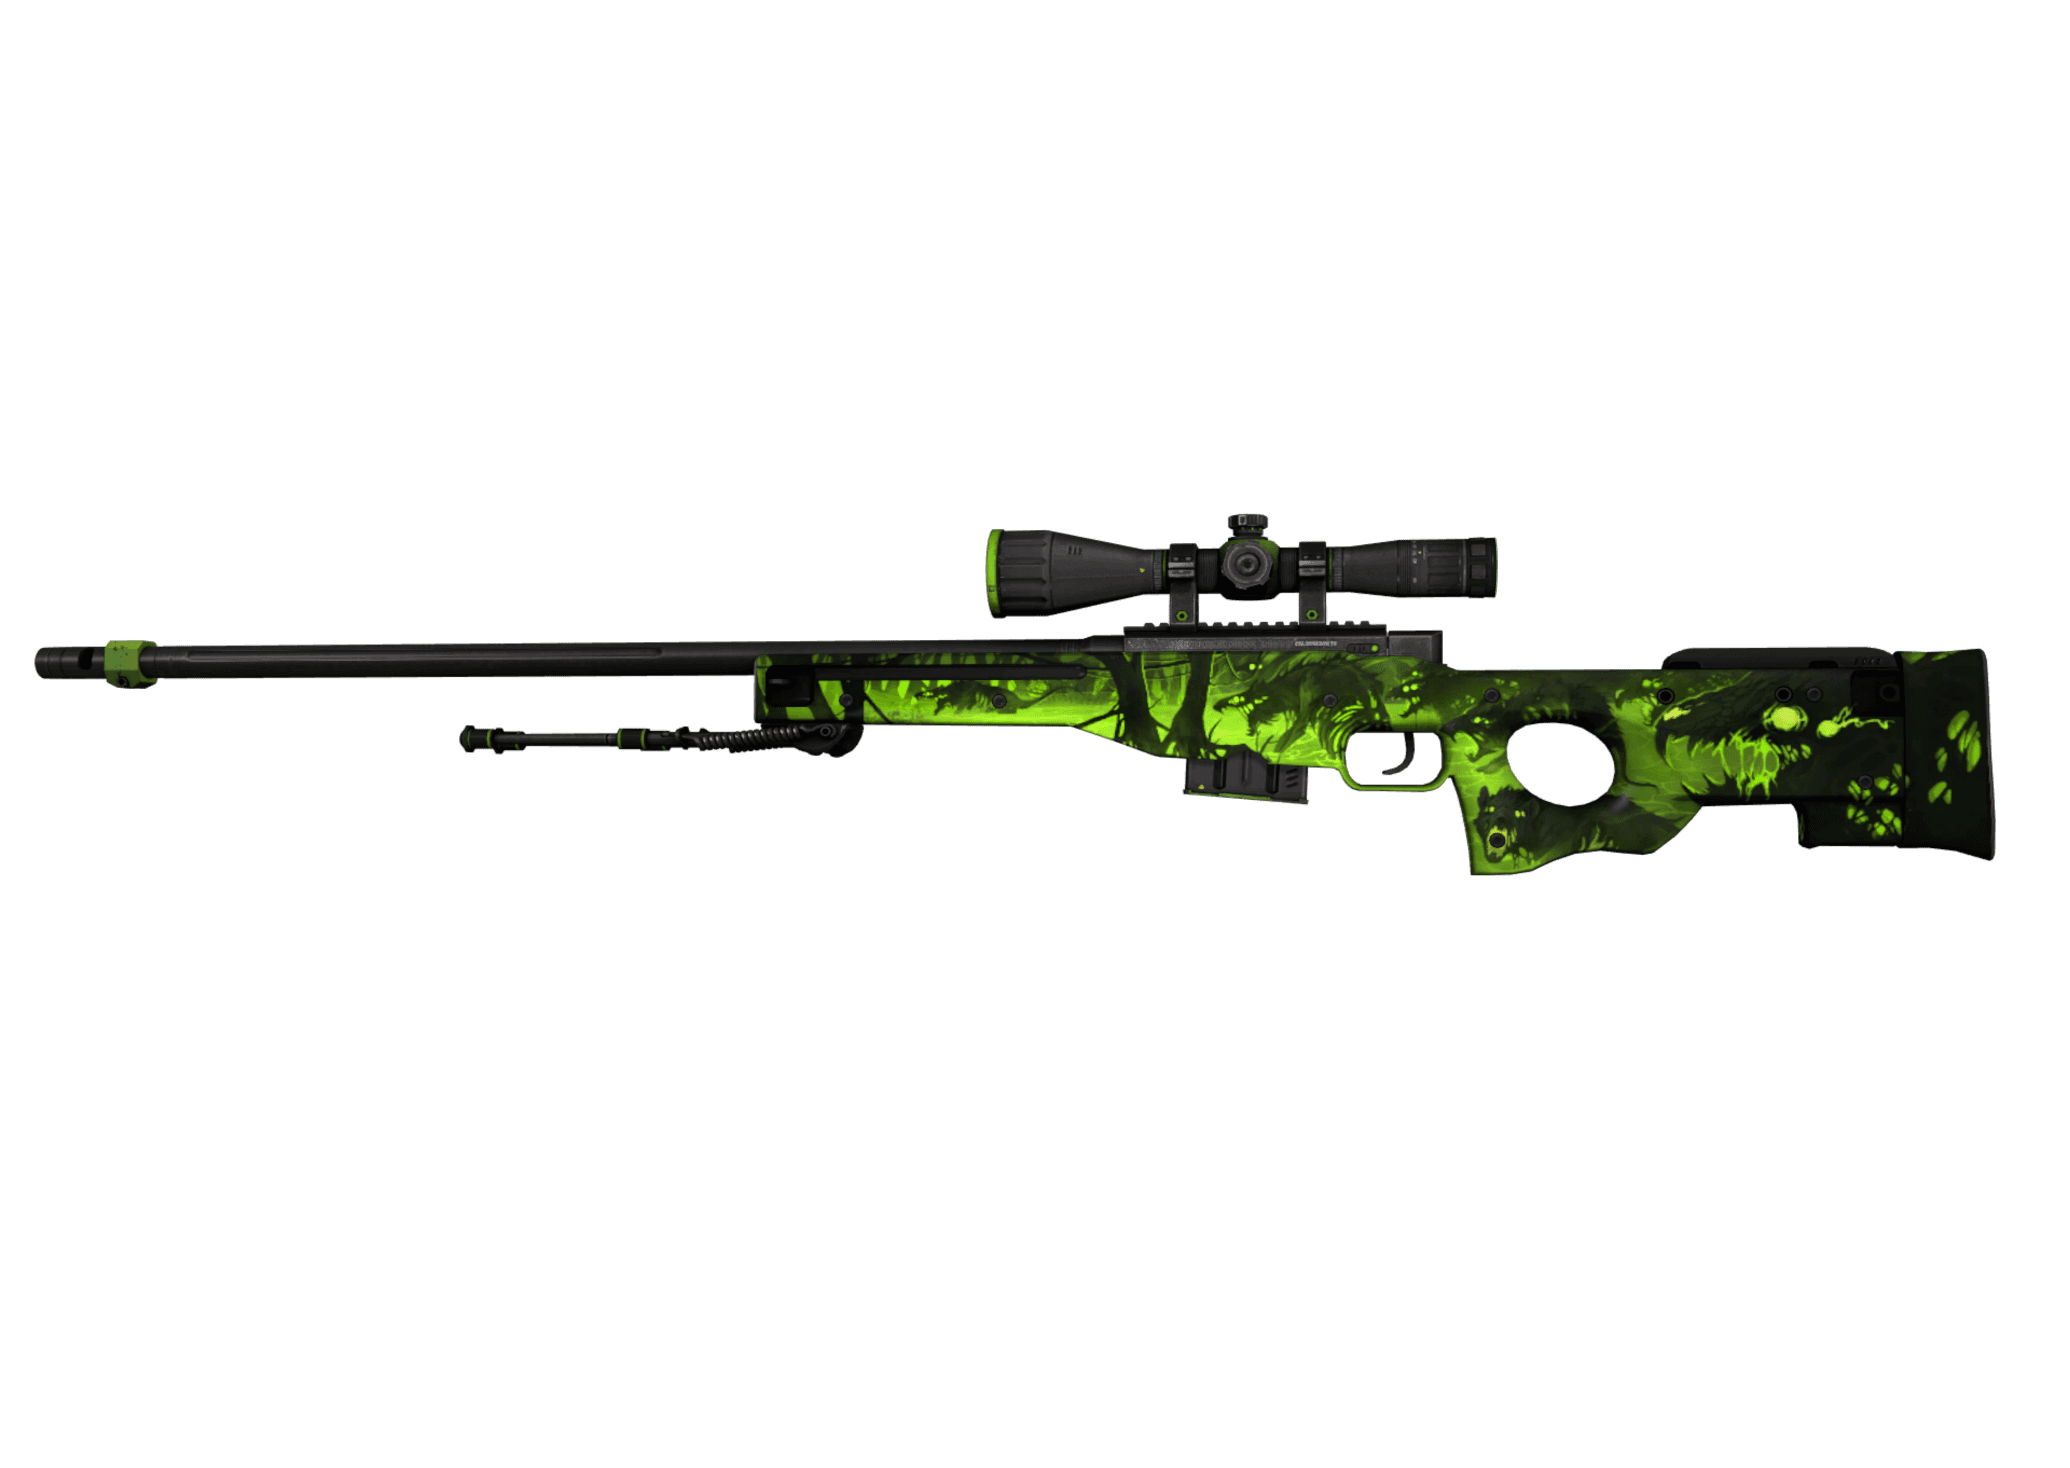 5 of the most expensive CS:GO skins right now - CS:GO